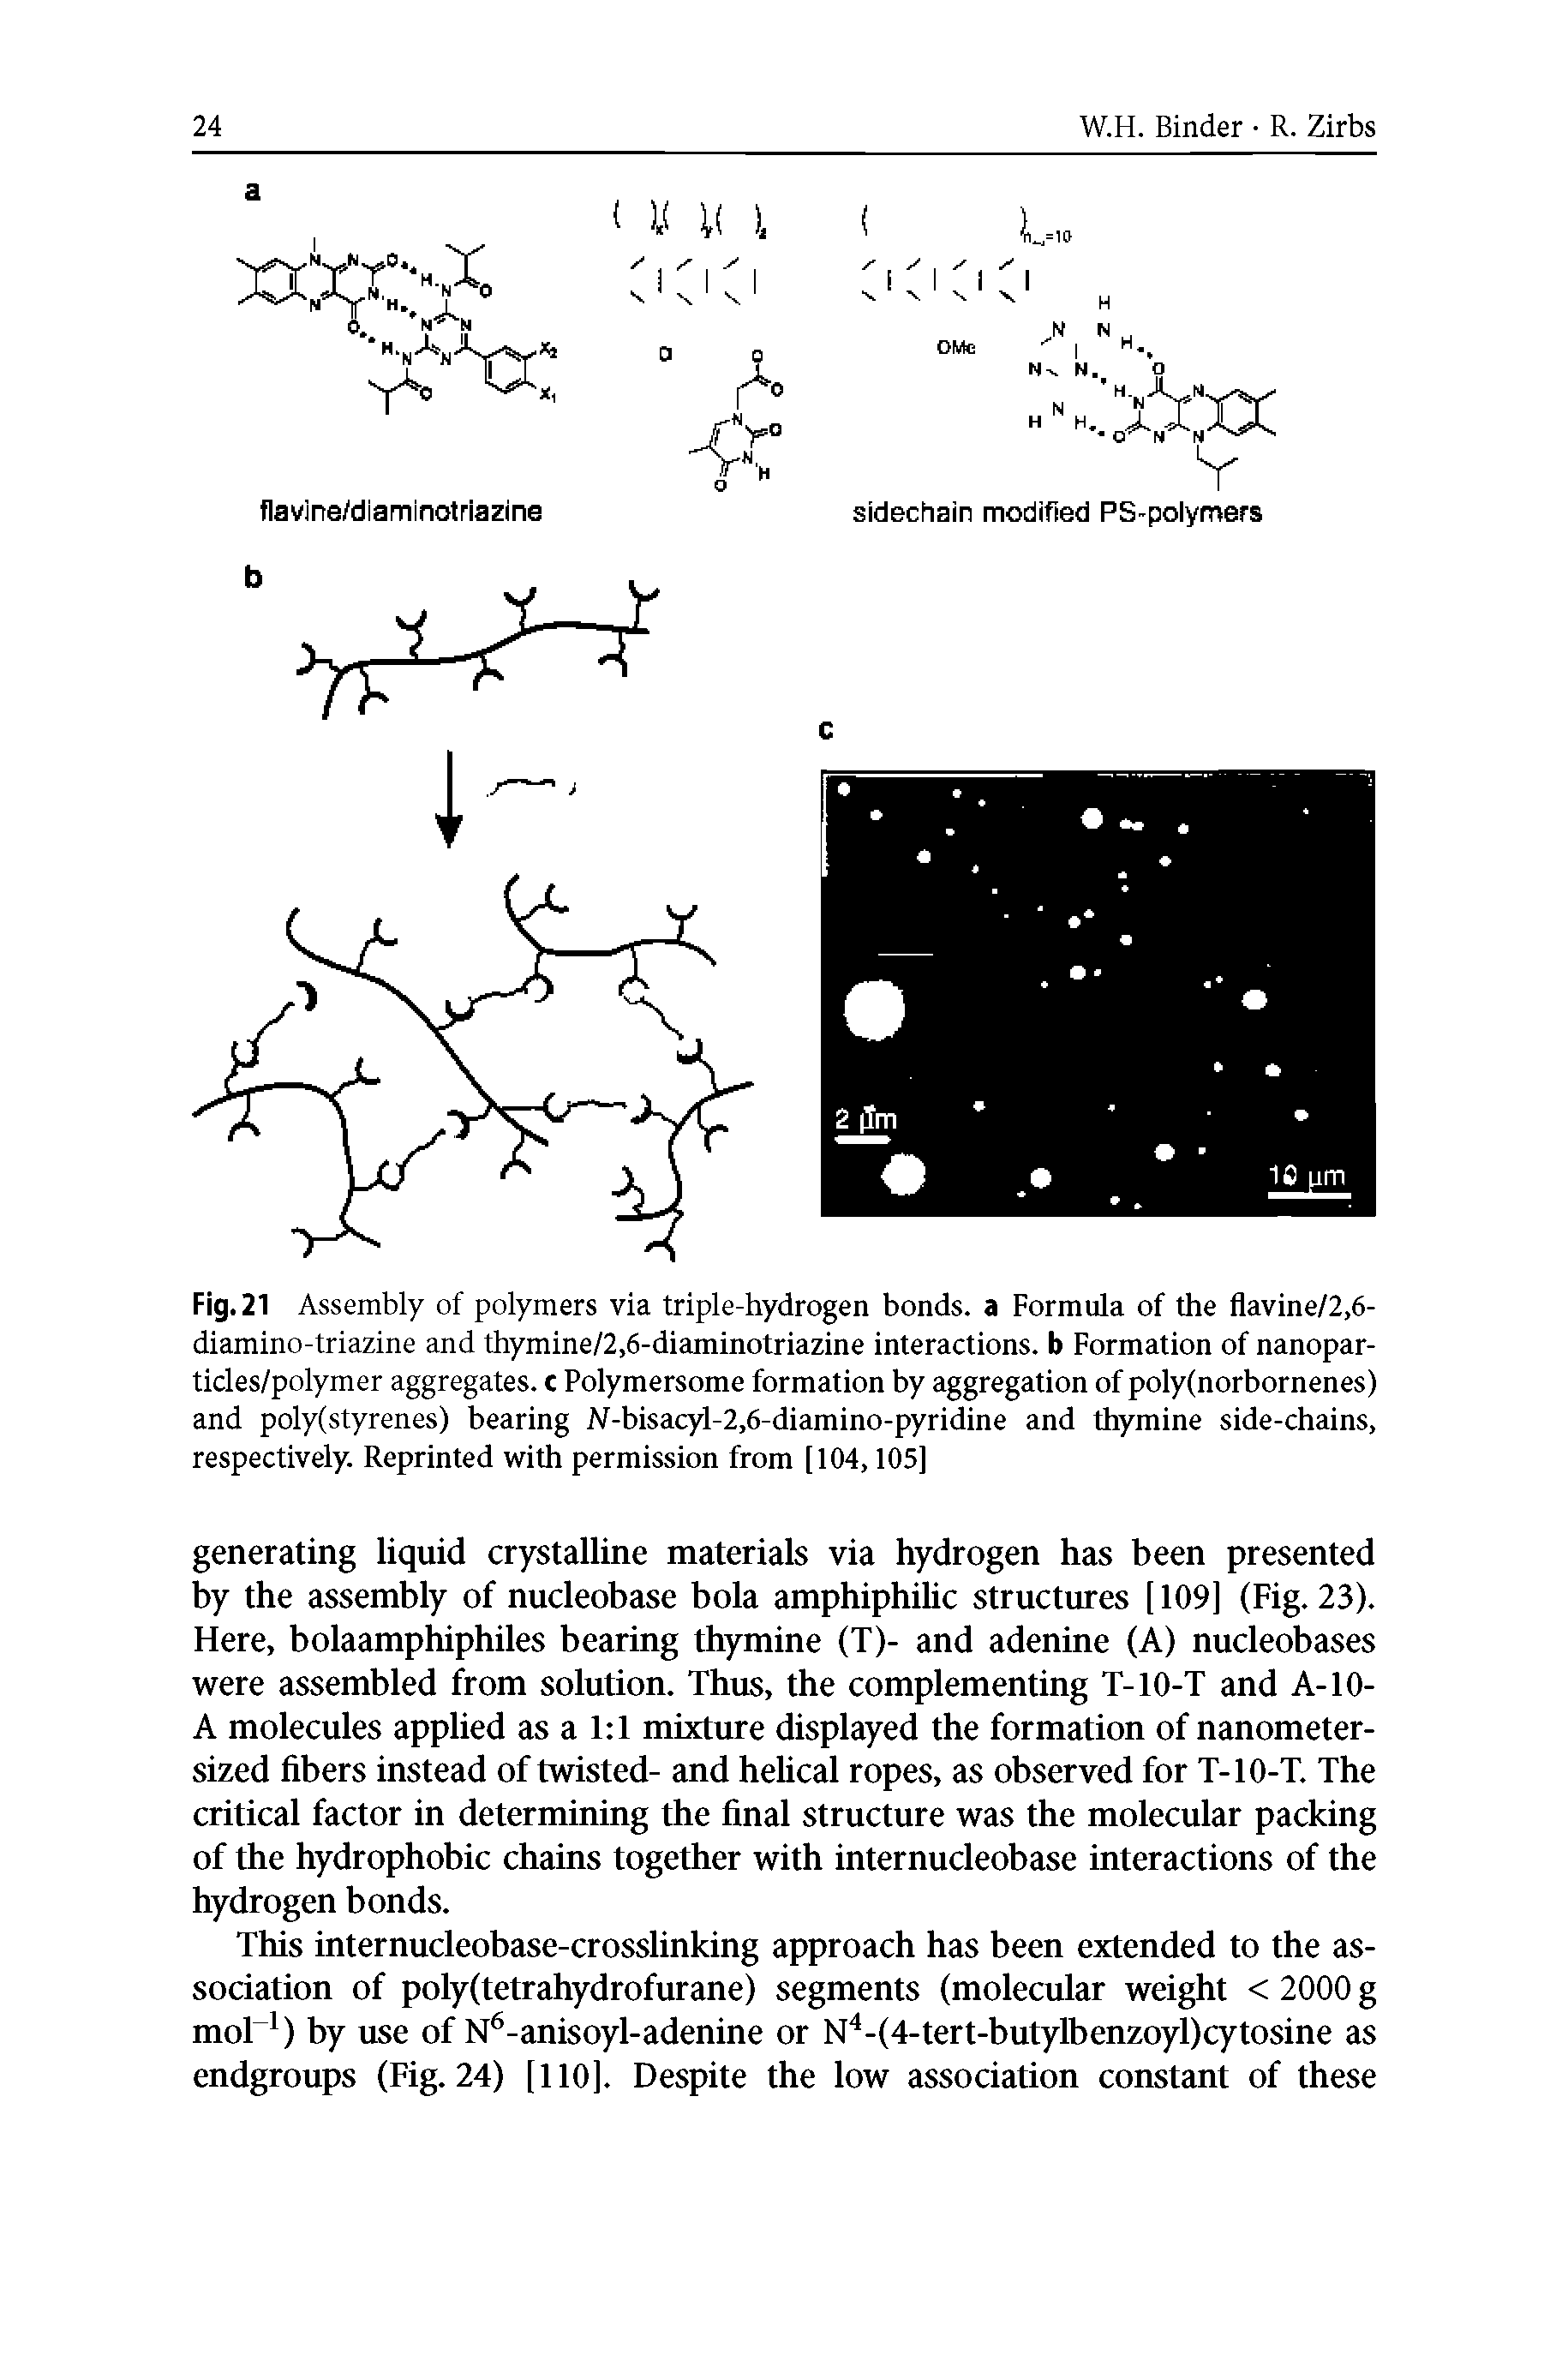 Fig. 21 Assembly of polymers via triple-hydrogen bonds, a Formula of the flavine/2,6-diamino-triazine and thymine/2,6-diaminotriazine interactions, b Formation of nanopar-ticles/polymer aggregates, c Polymersome formation by aggregation of poly(norbornenes) and poly(styrenes) bearing N-bisacyl-2,6-diamino-pyridine and thymine side-chains, respectively. Reprinted with permission from [104,105]...